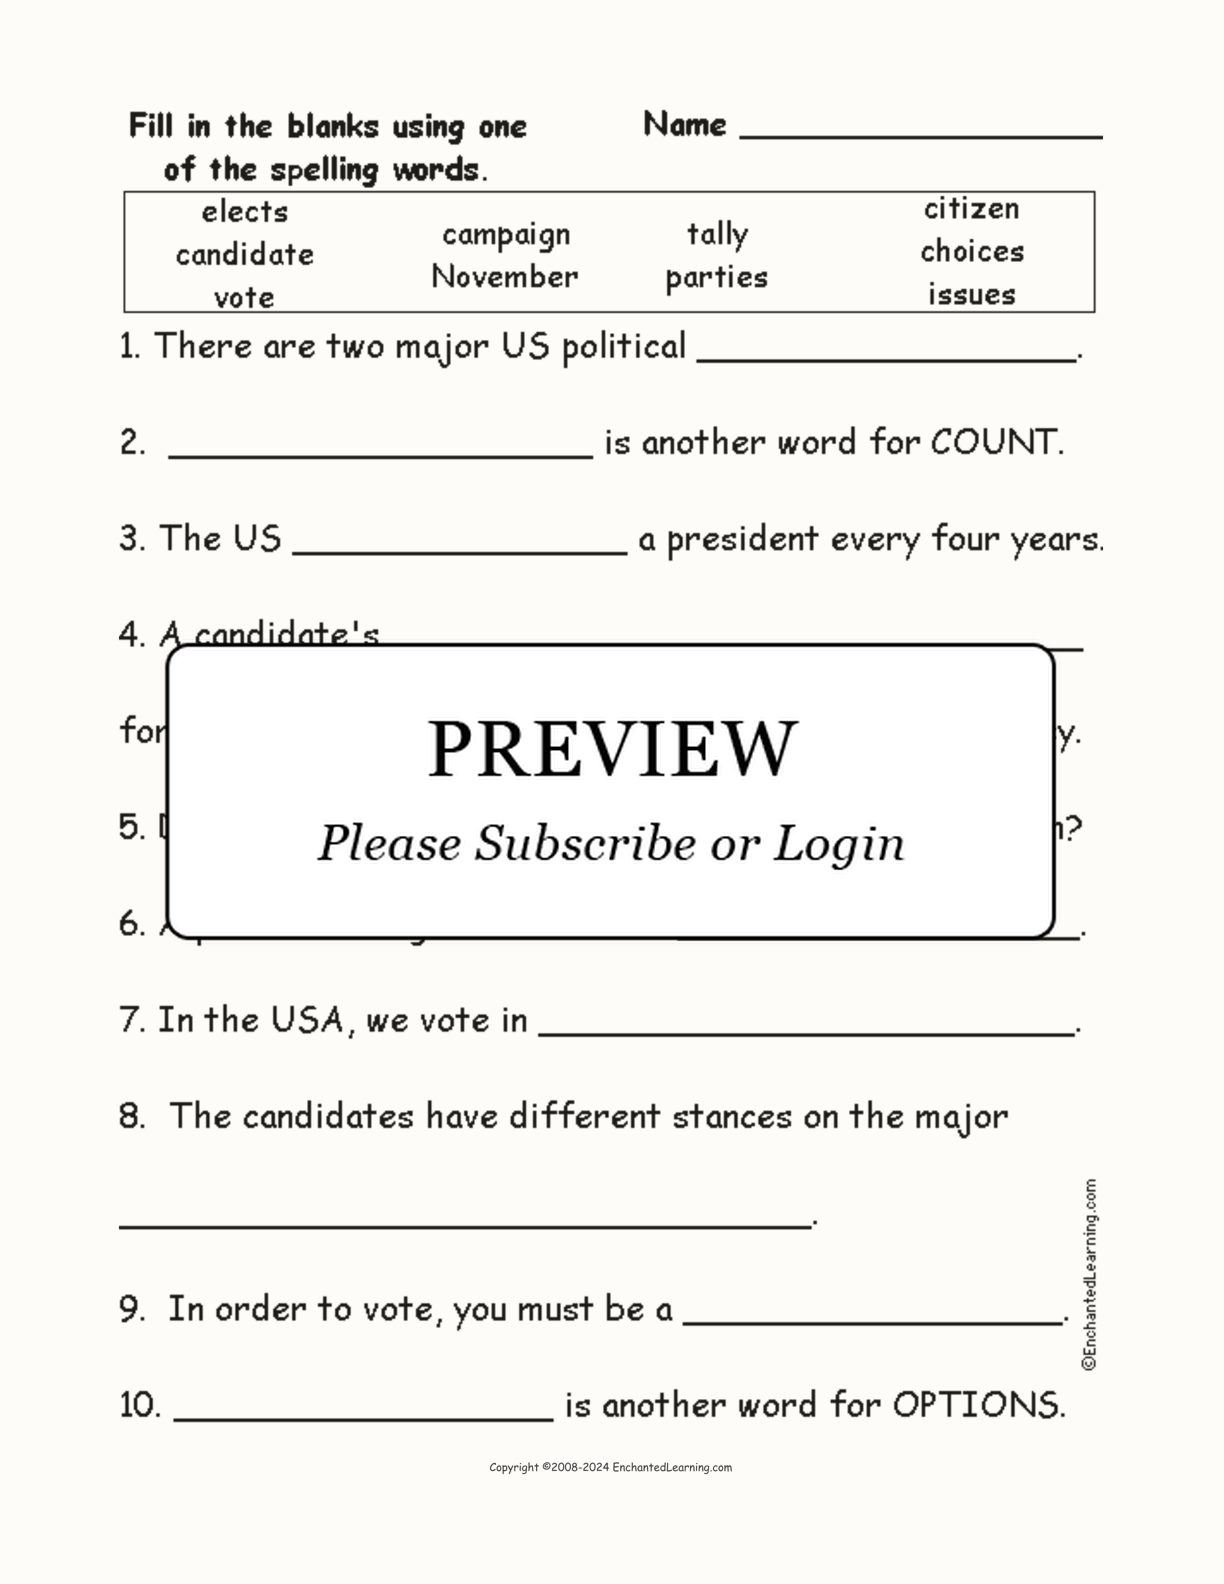 Election Spelling Word Questions interactive worksheet page 1